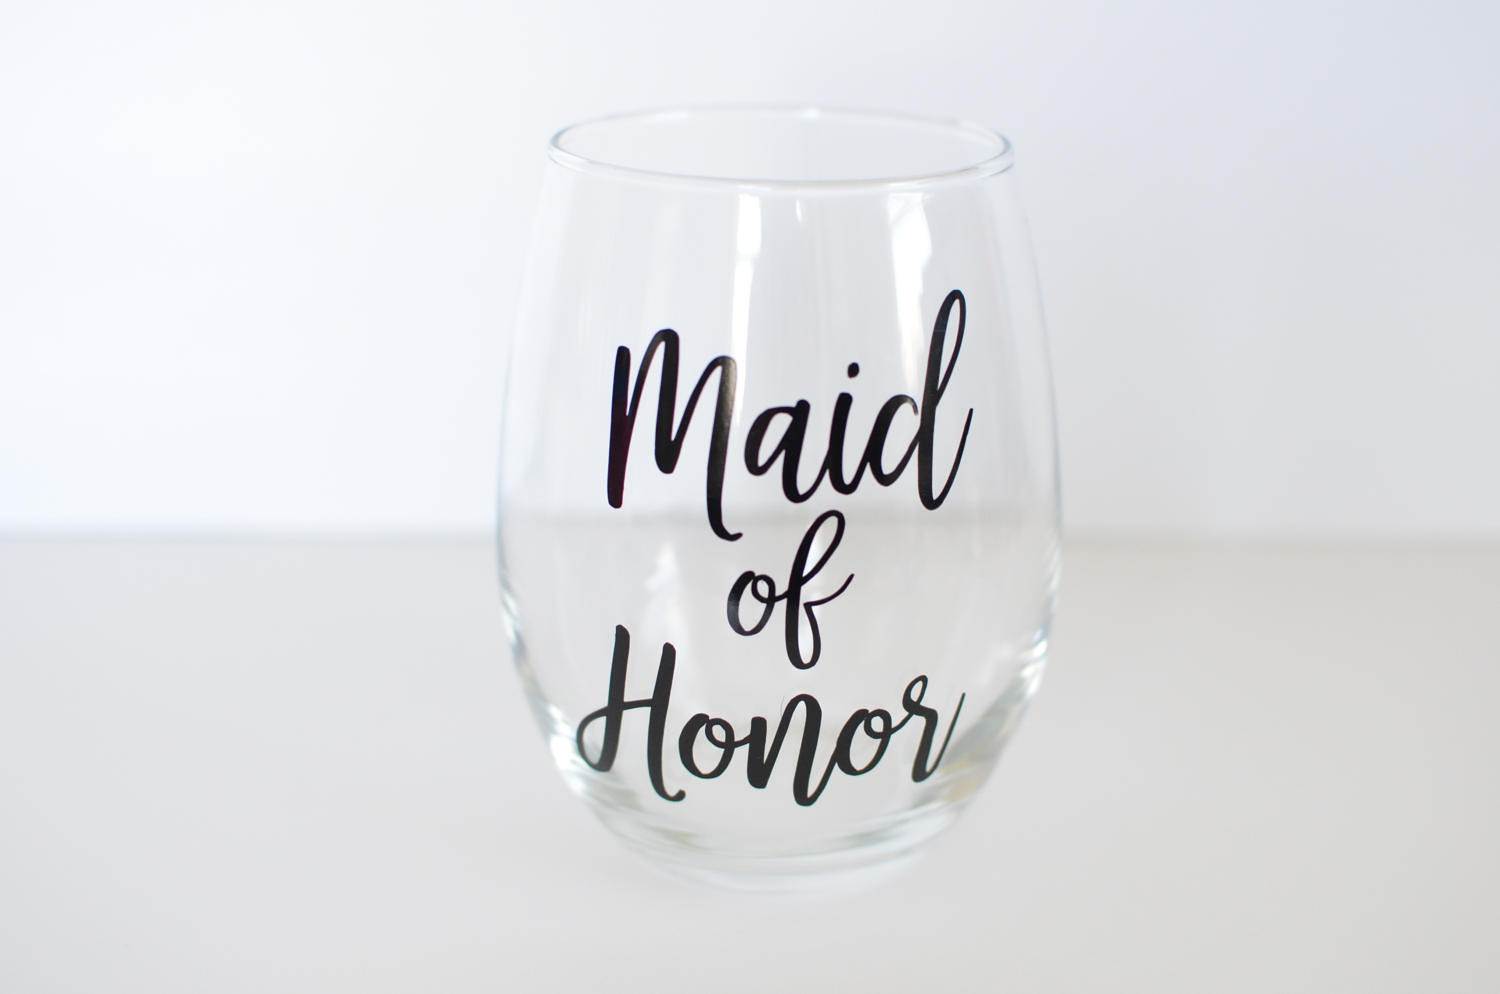 https://twistedhangers.com/wp-content/uploads/2017/03/maid-of-honor-wine-glass-maid-of-honor-gift-58cb62721.jpg